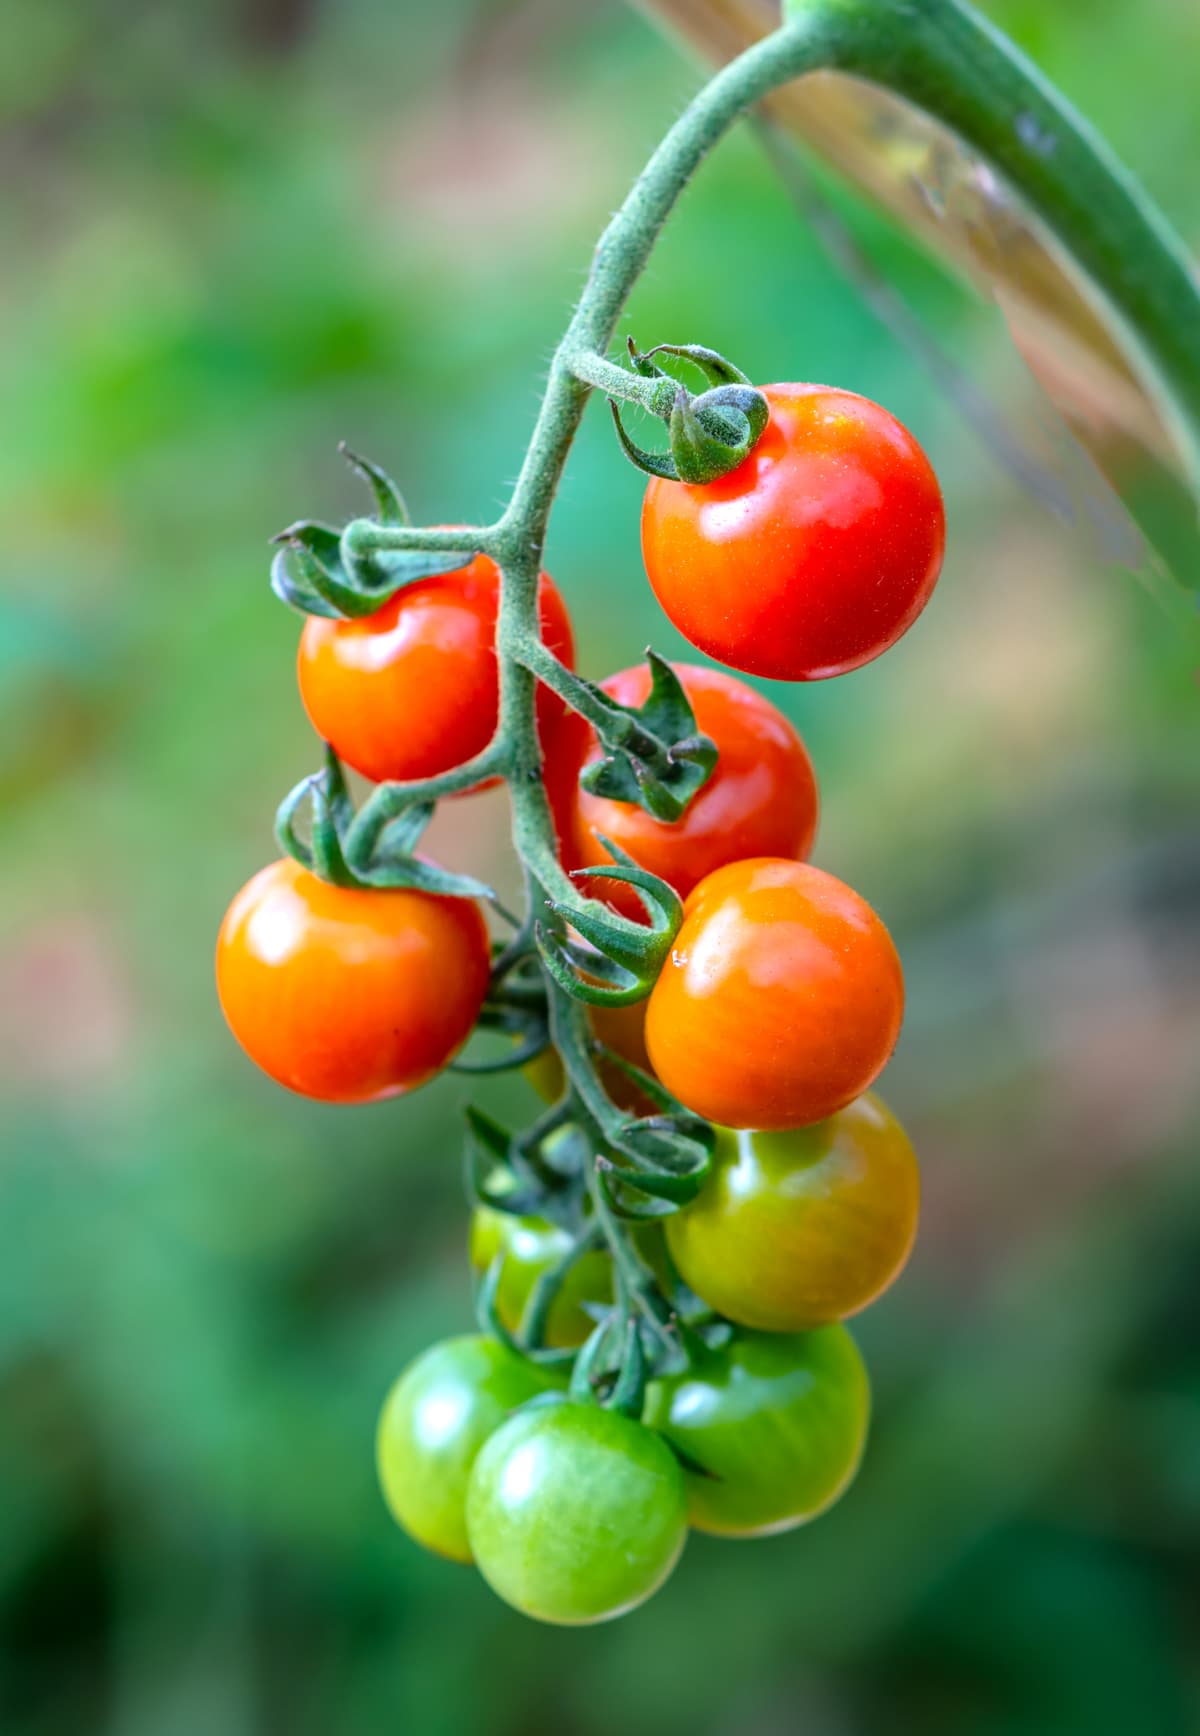 Unripe and ripe tomatoes hanging from a branch